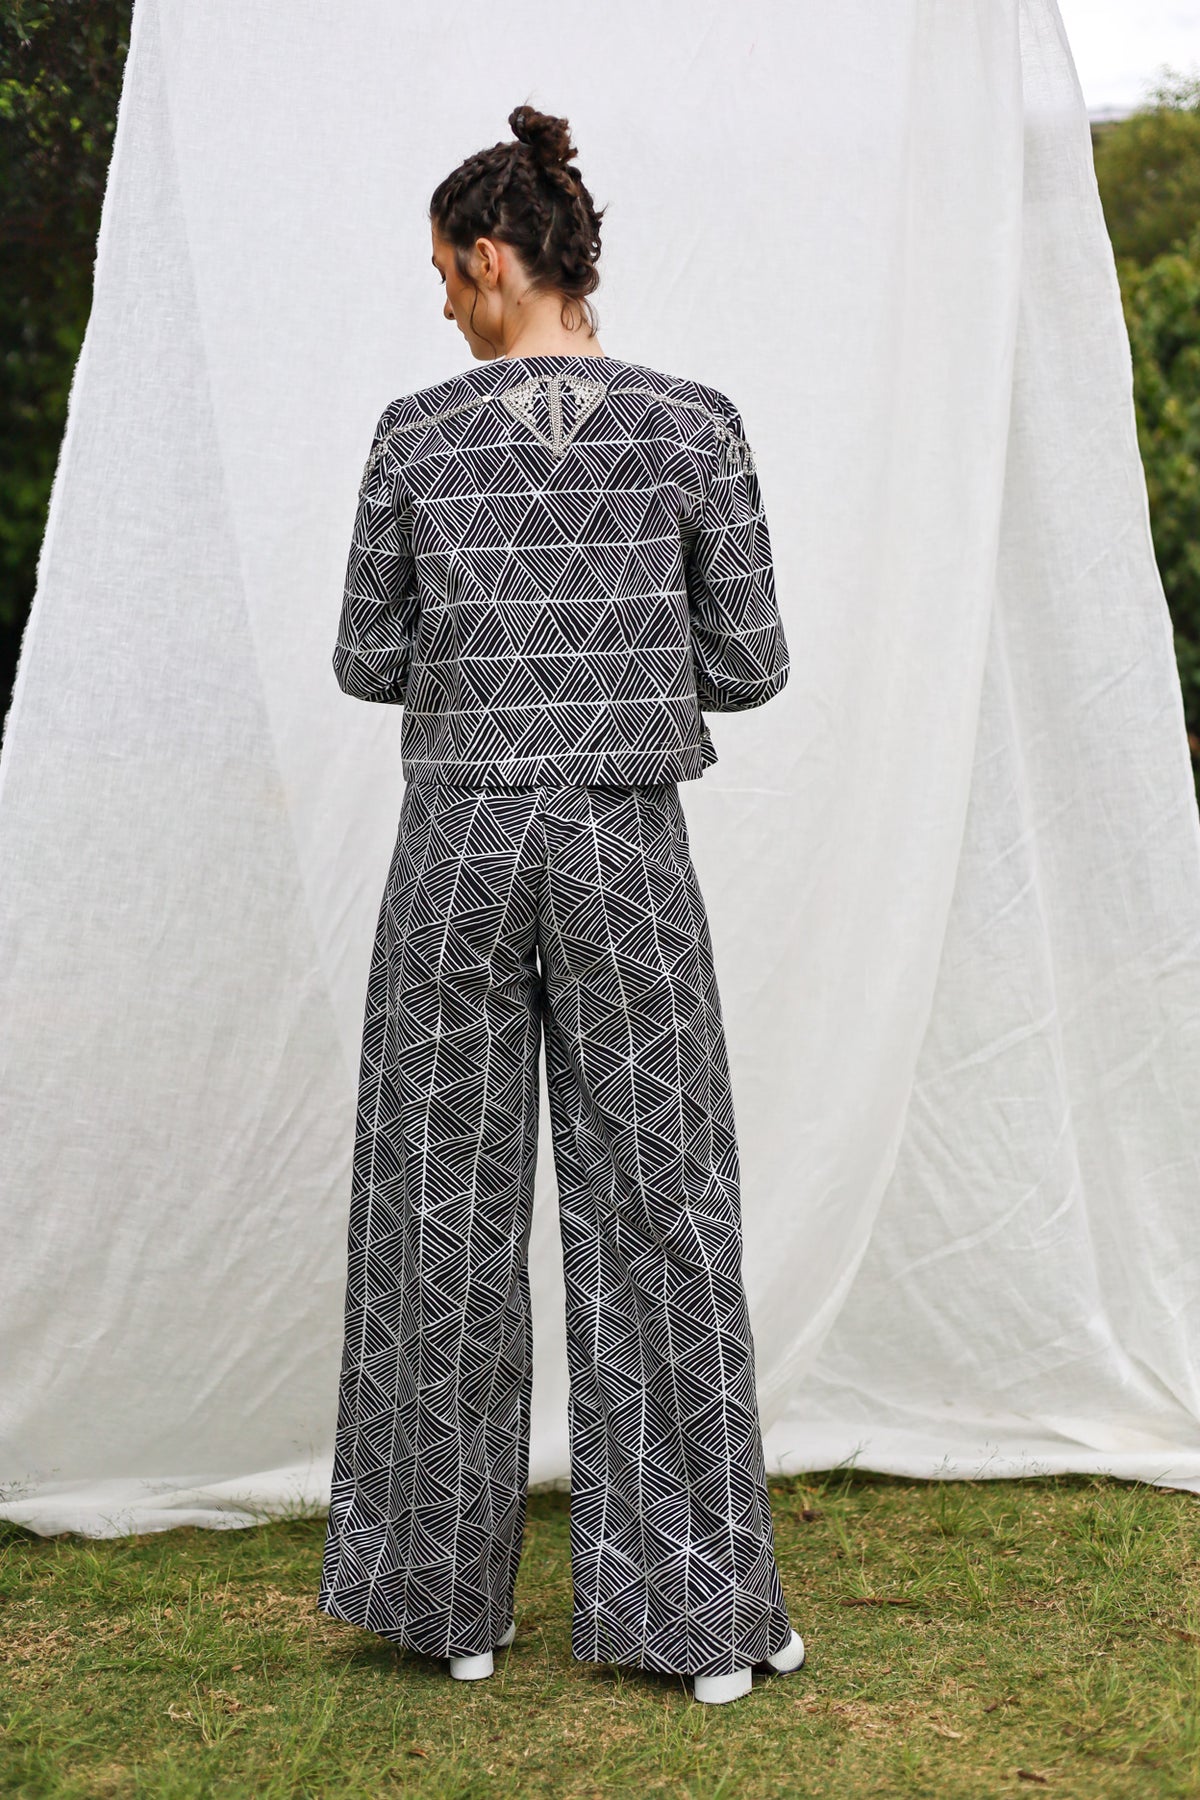 GLORY by Tiwi Design x Ossom Pandanus High Waist Tailored Pants in Lightweight Cotton